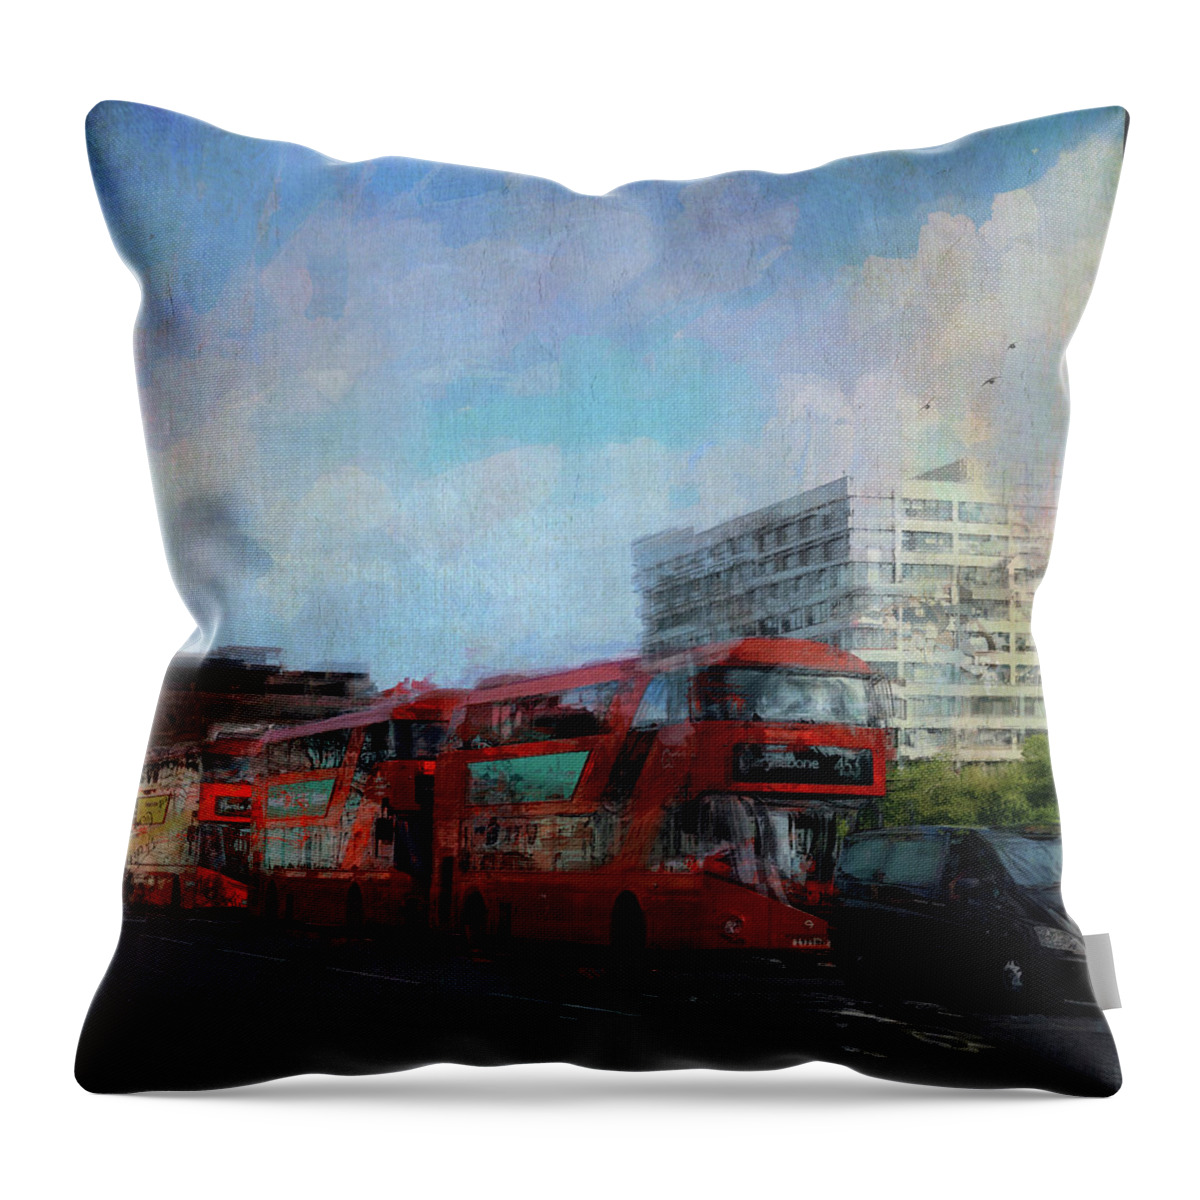 London Throw Pillow featuring the digital art Buses on Westminster Bridge by Nicky Jameson